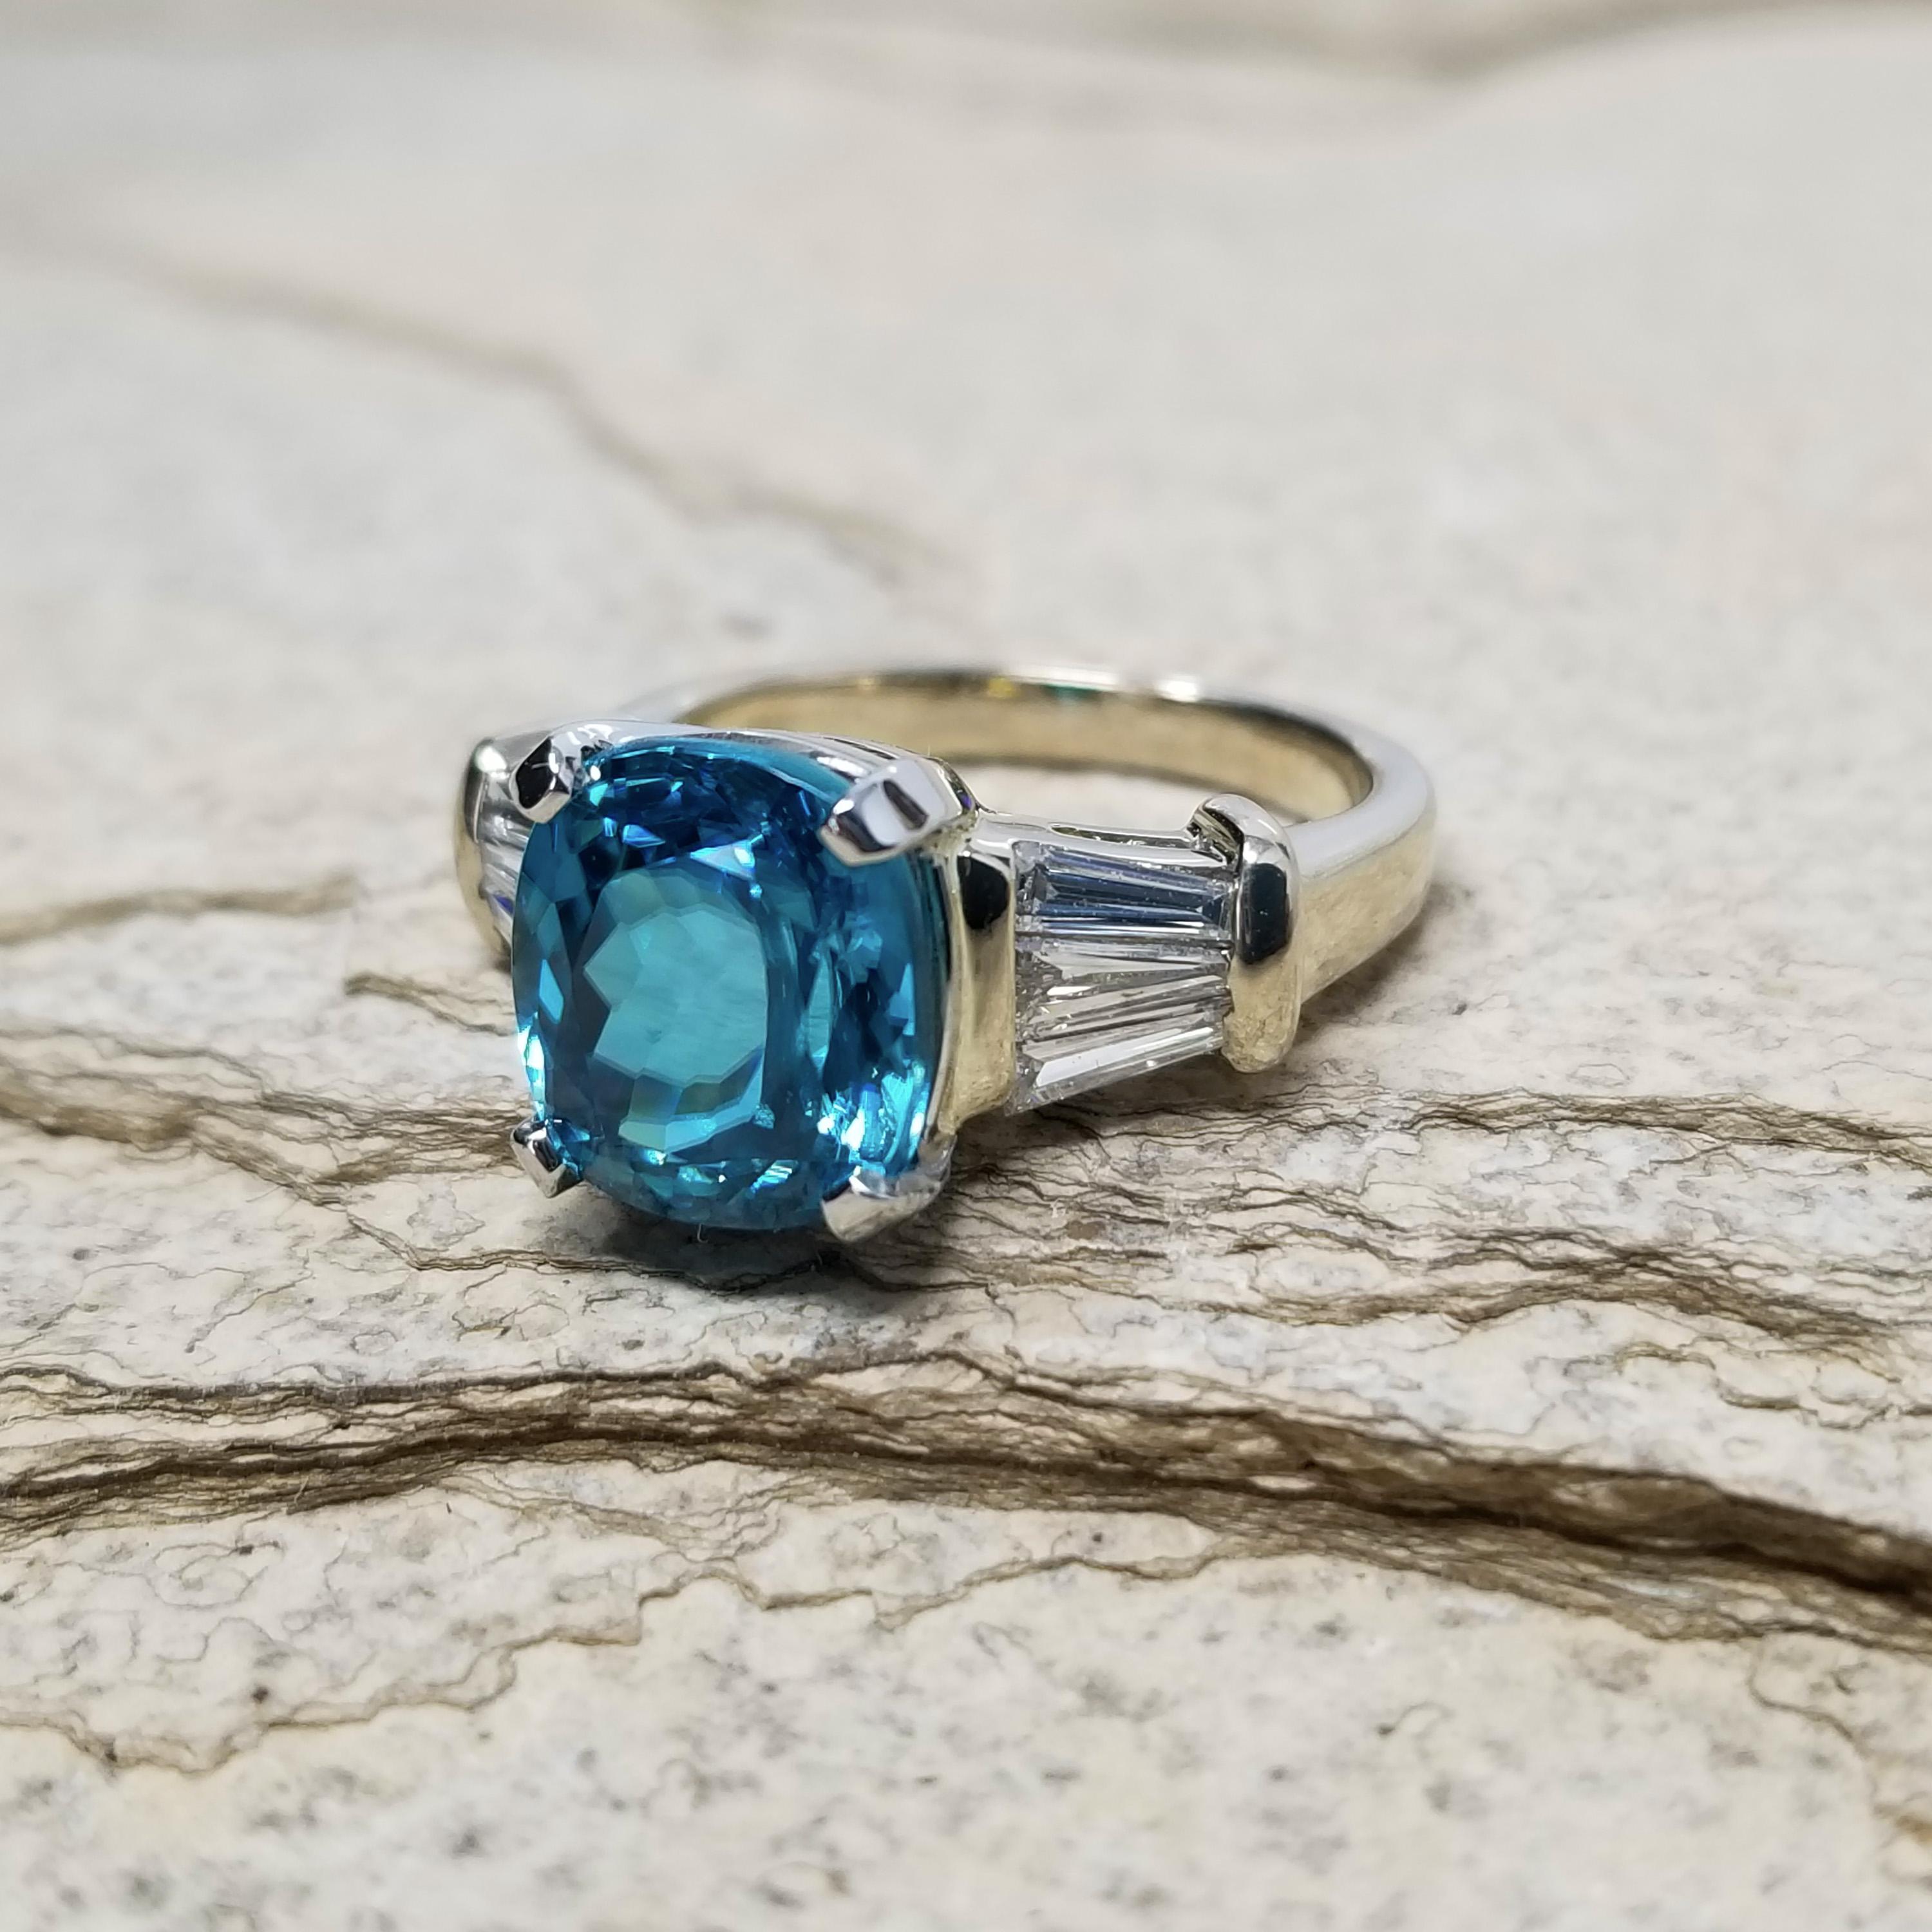 This lively Cambodian Blue Zircon was cut to maximize zircon's inherent brilliance, and the result is absolutely scintillating. A rich, turquoise blue dazzles in this eye-popping gemstone.

This diamond ring is a timeless style; it is an elegant and